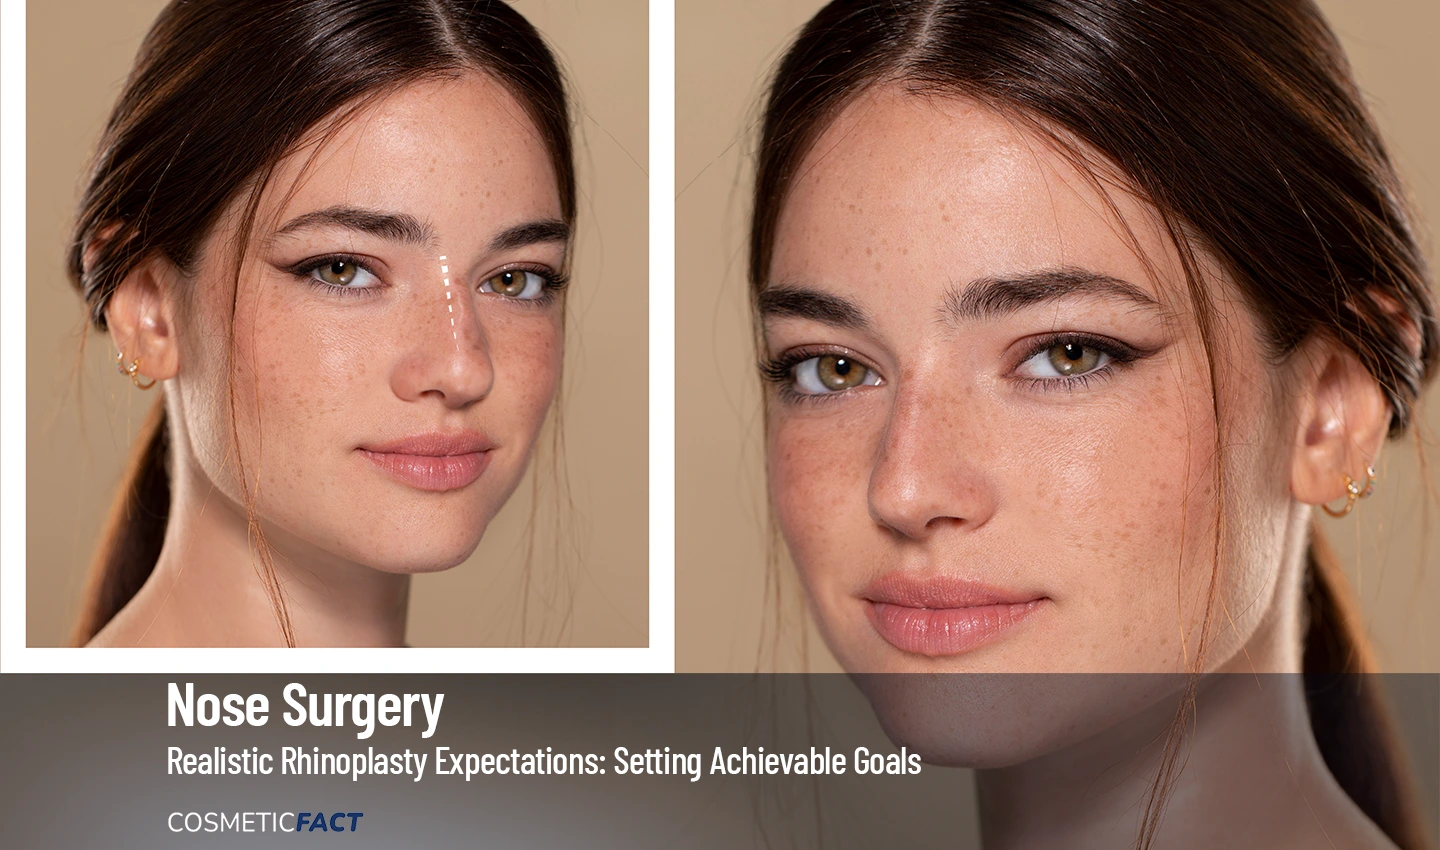 A before-and-after photo of a woman's face, showing her nose before and after a successful rhinoplasty procedure that met her realistic expectations.